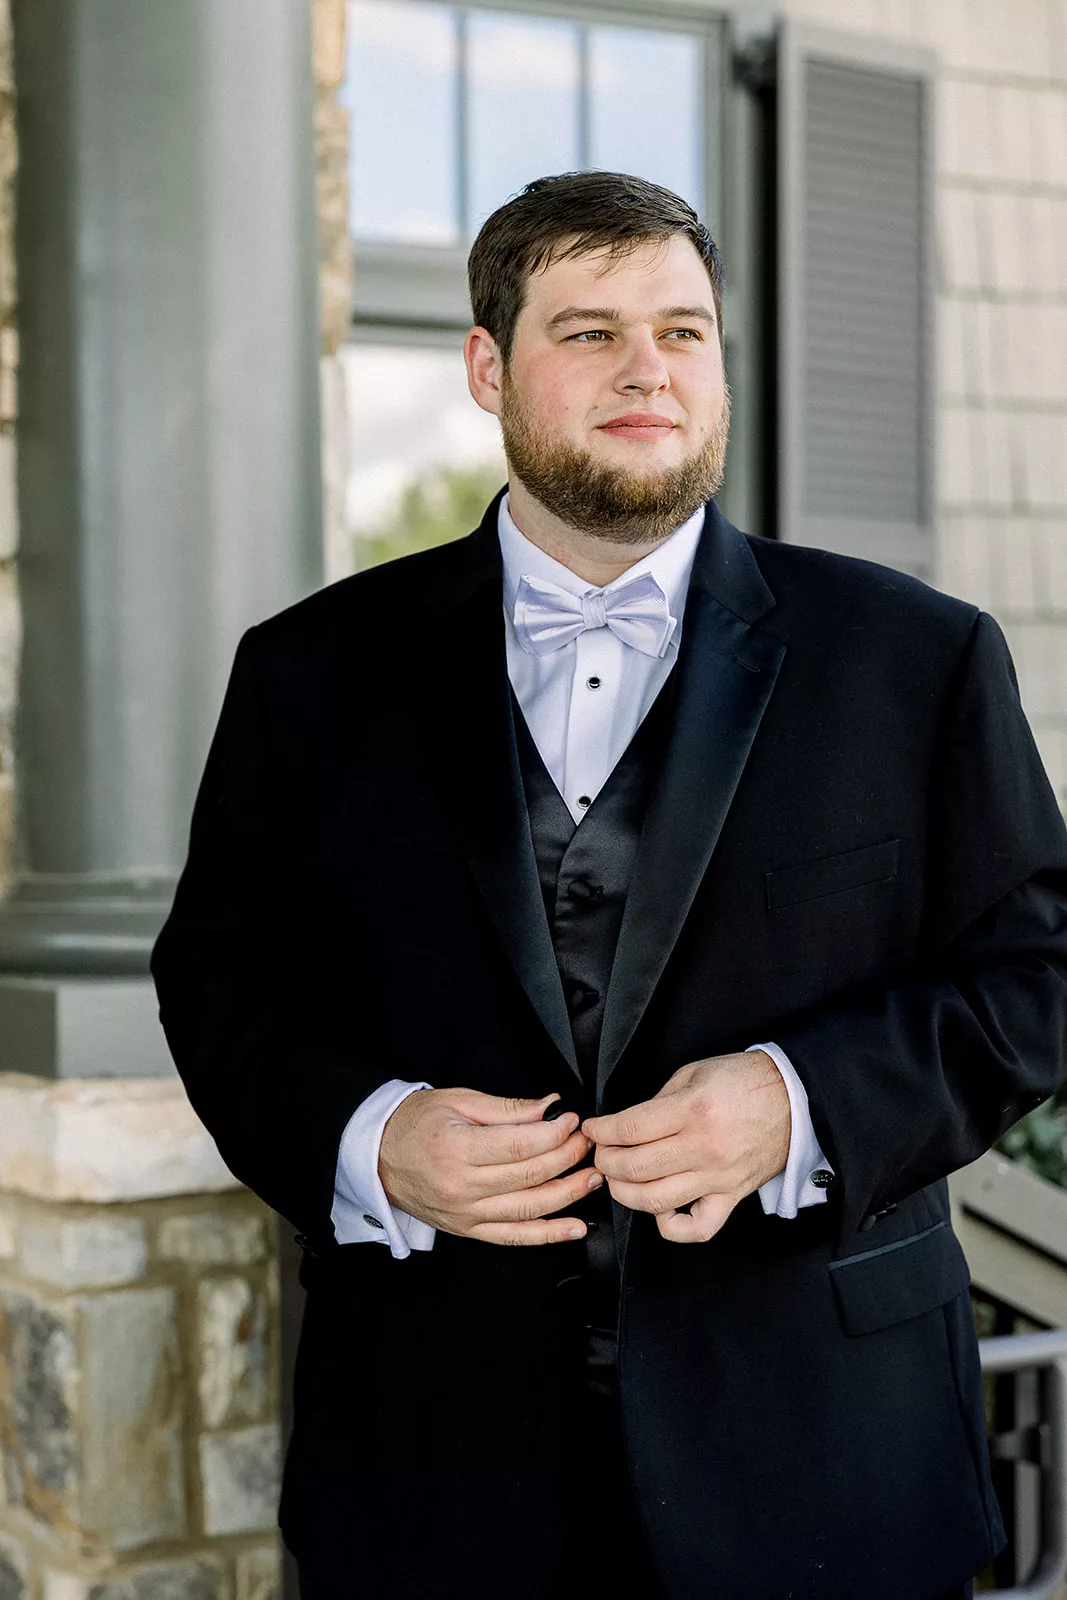 A groom stands outside a stone building buttoning his black tuxedo jacket